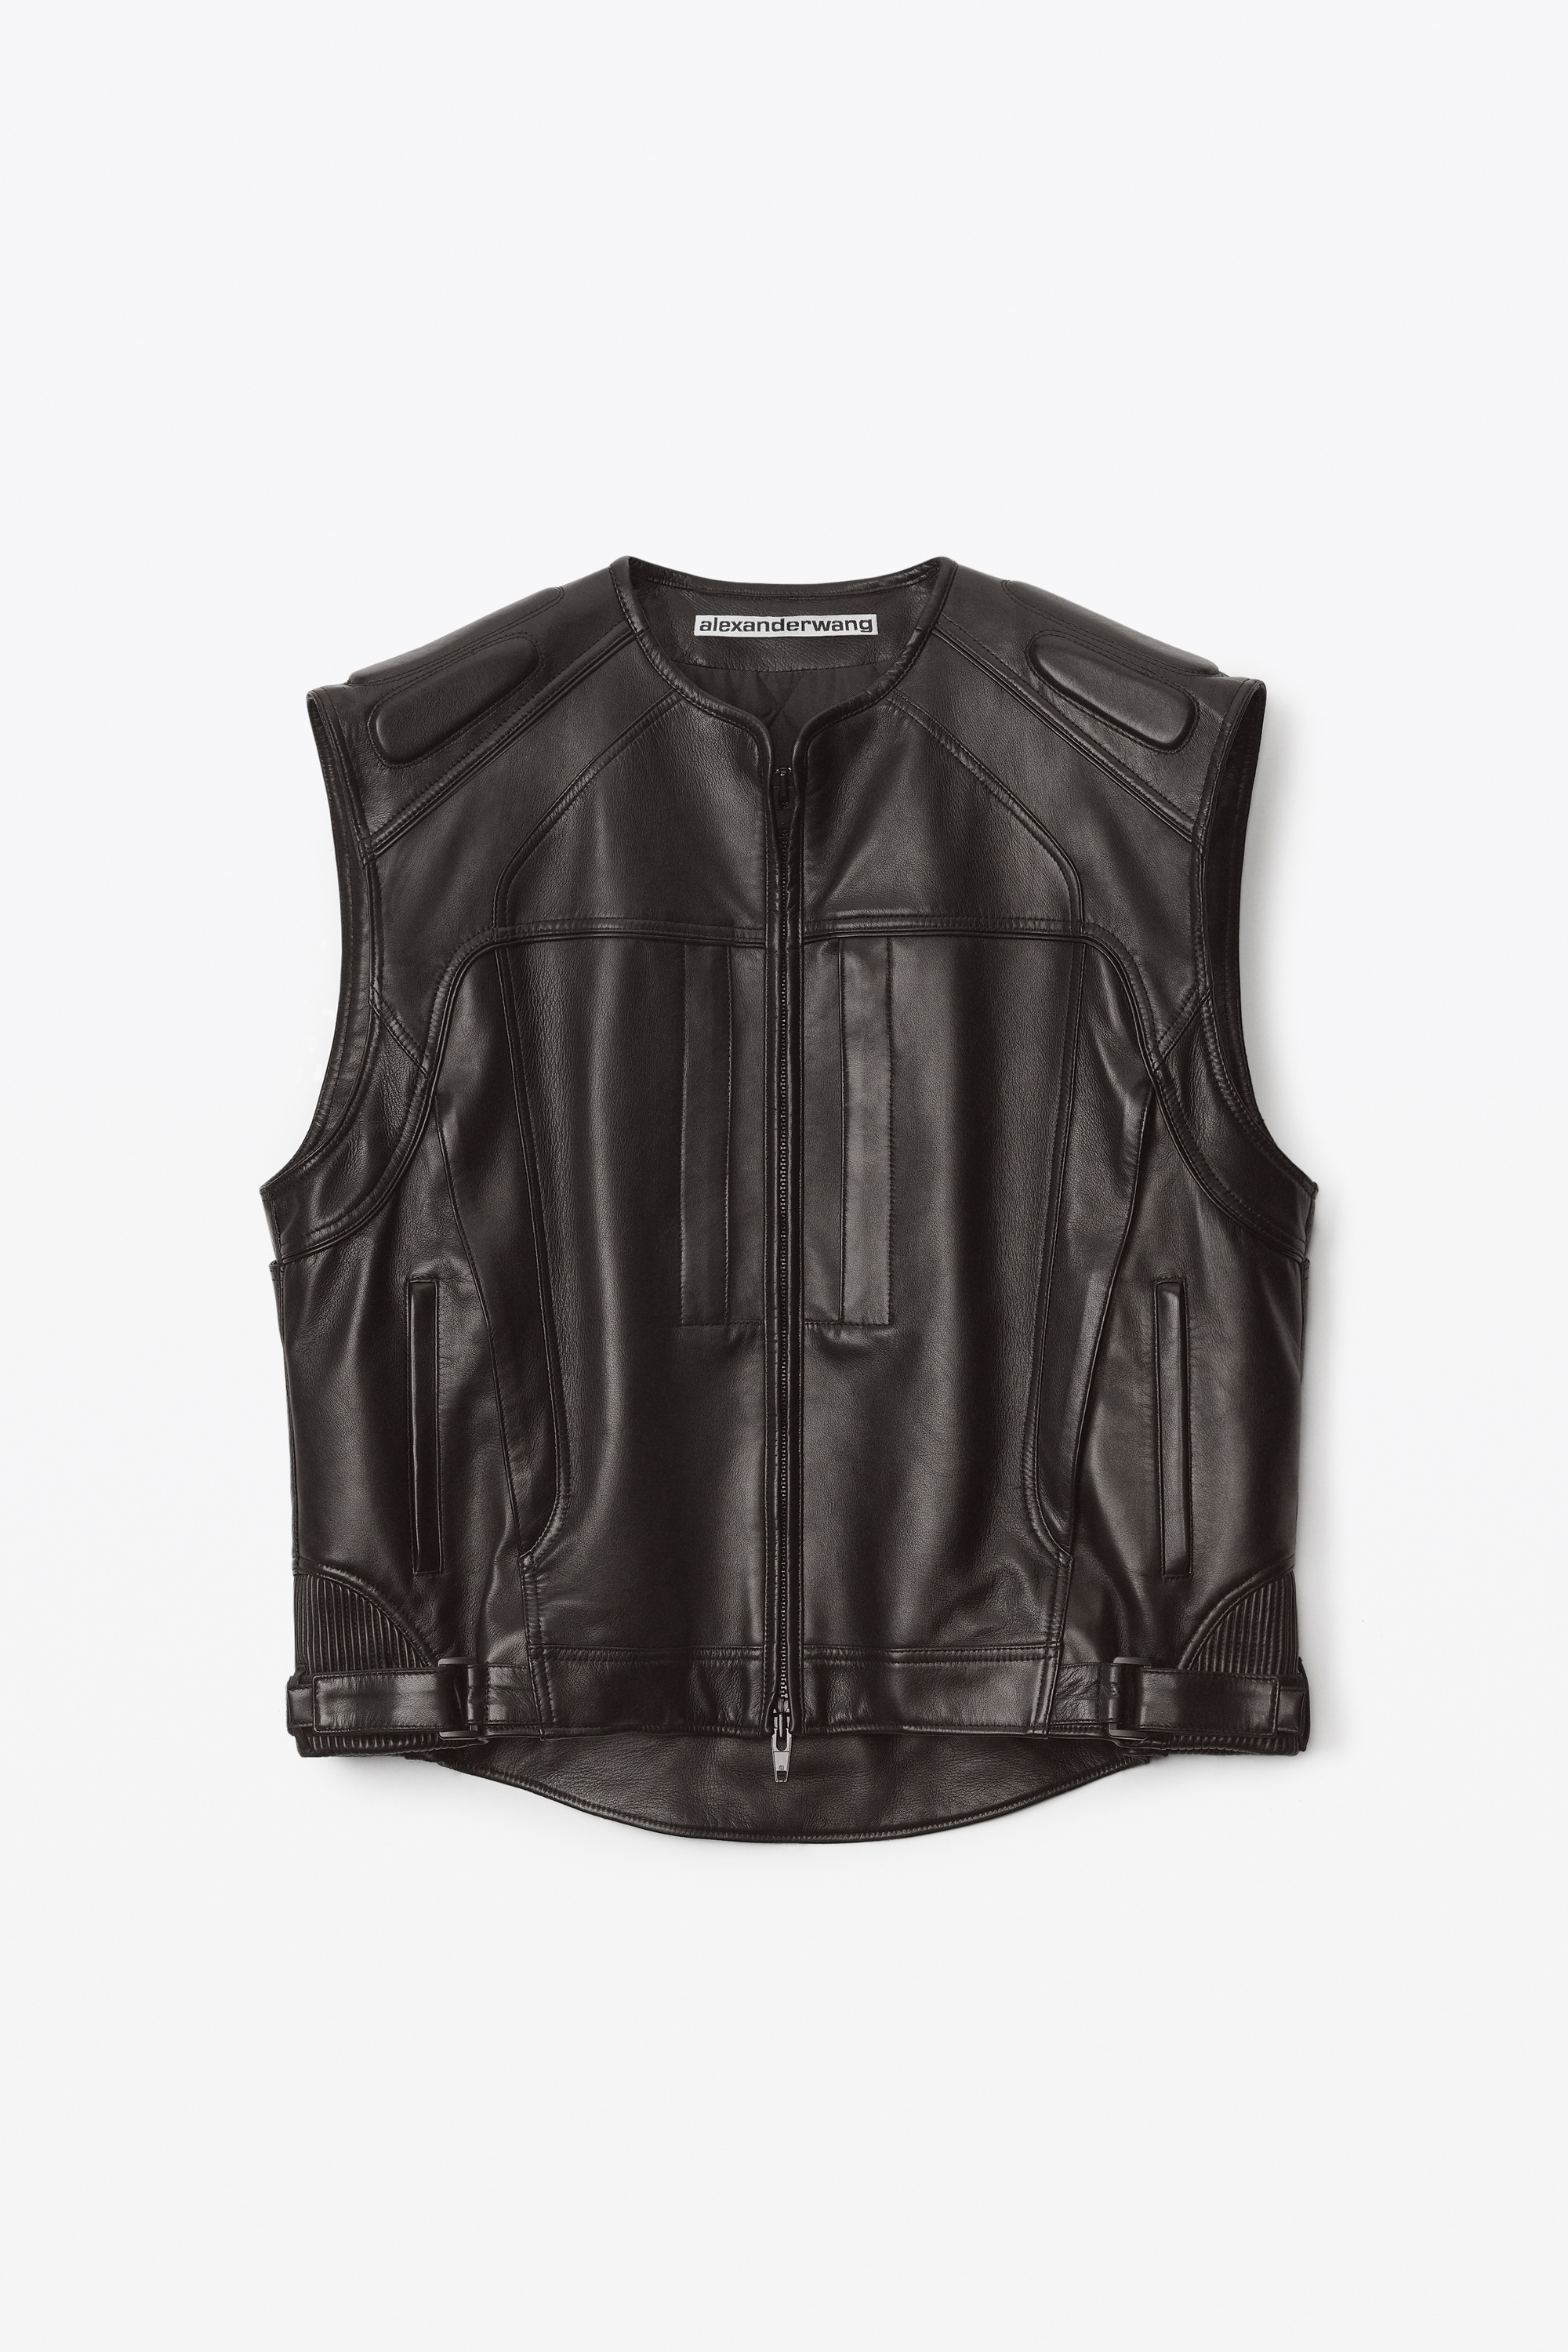 Alexander Wang OVERSIZED MOTO VEST IN BUTTERY LEATHER | REVERSIBLE